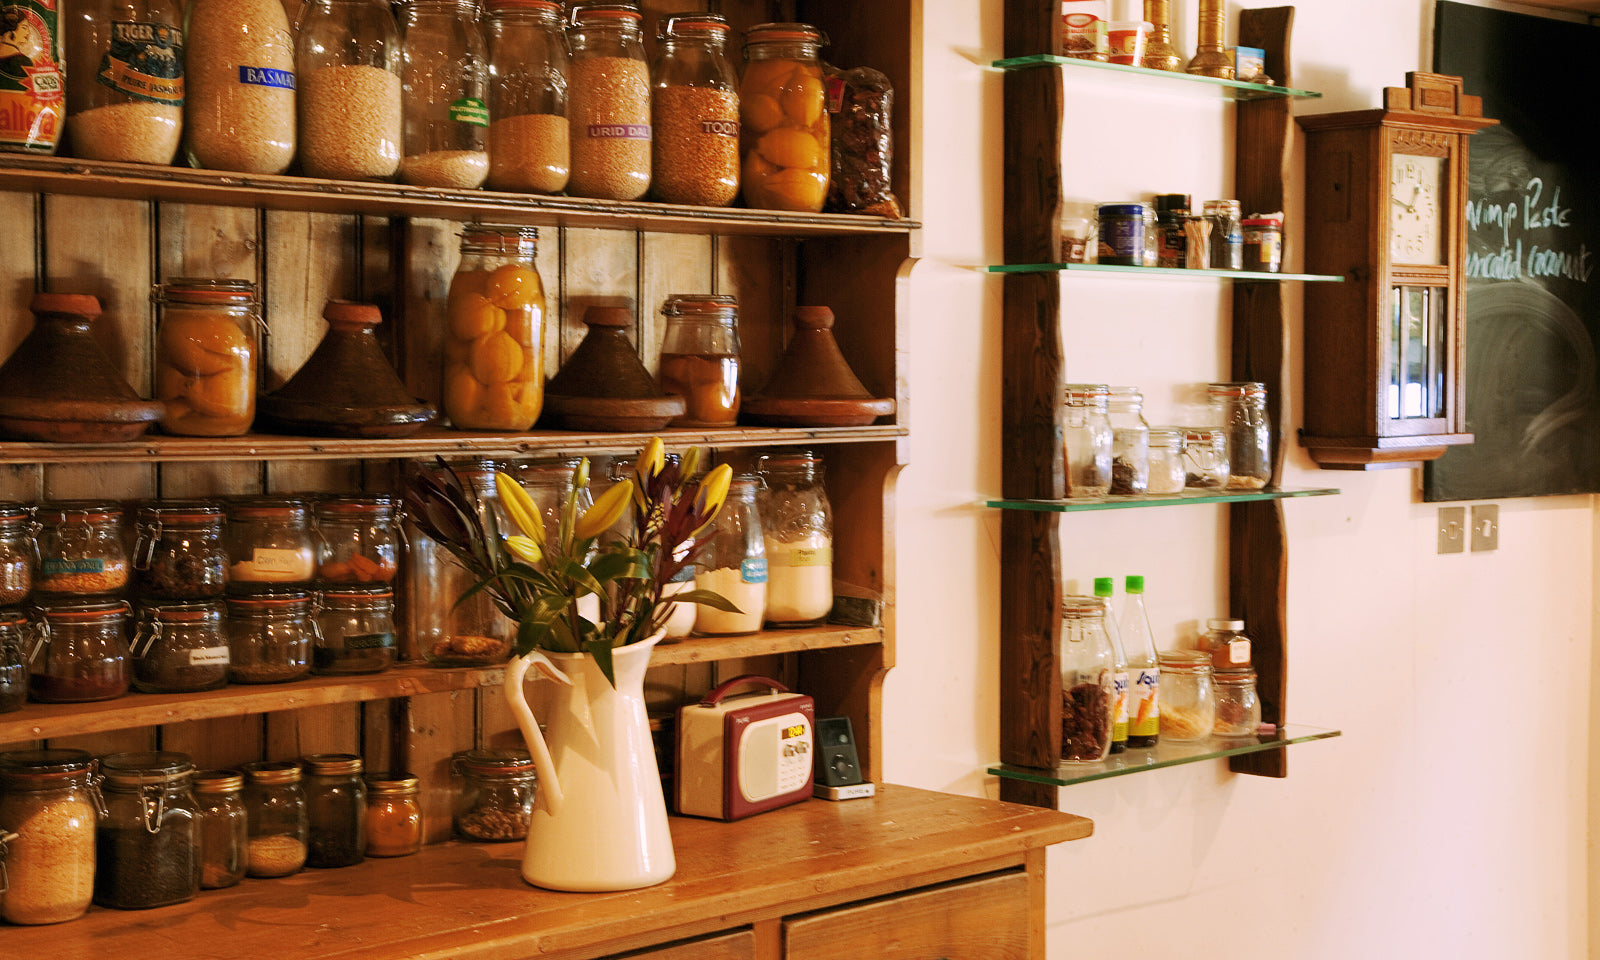 A stocked pantry adds a warm, homey feel to our kitchen venue.